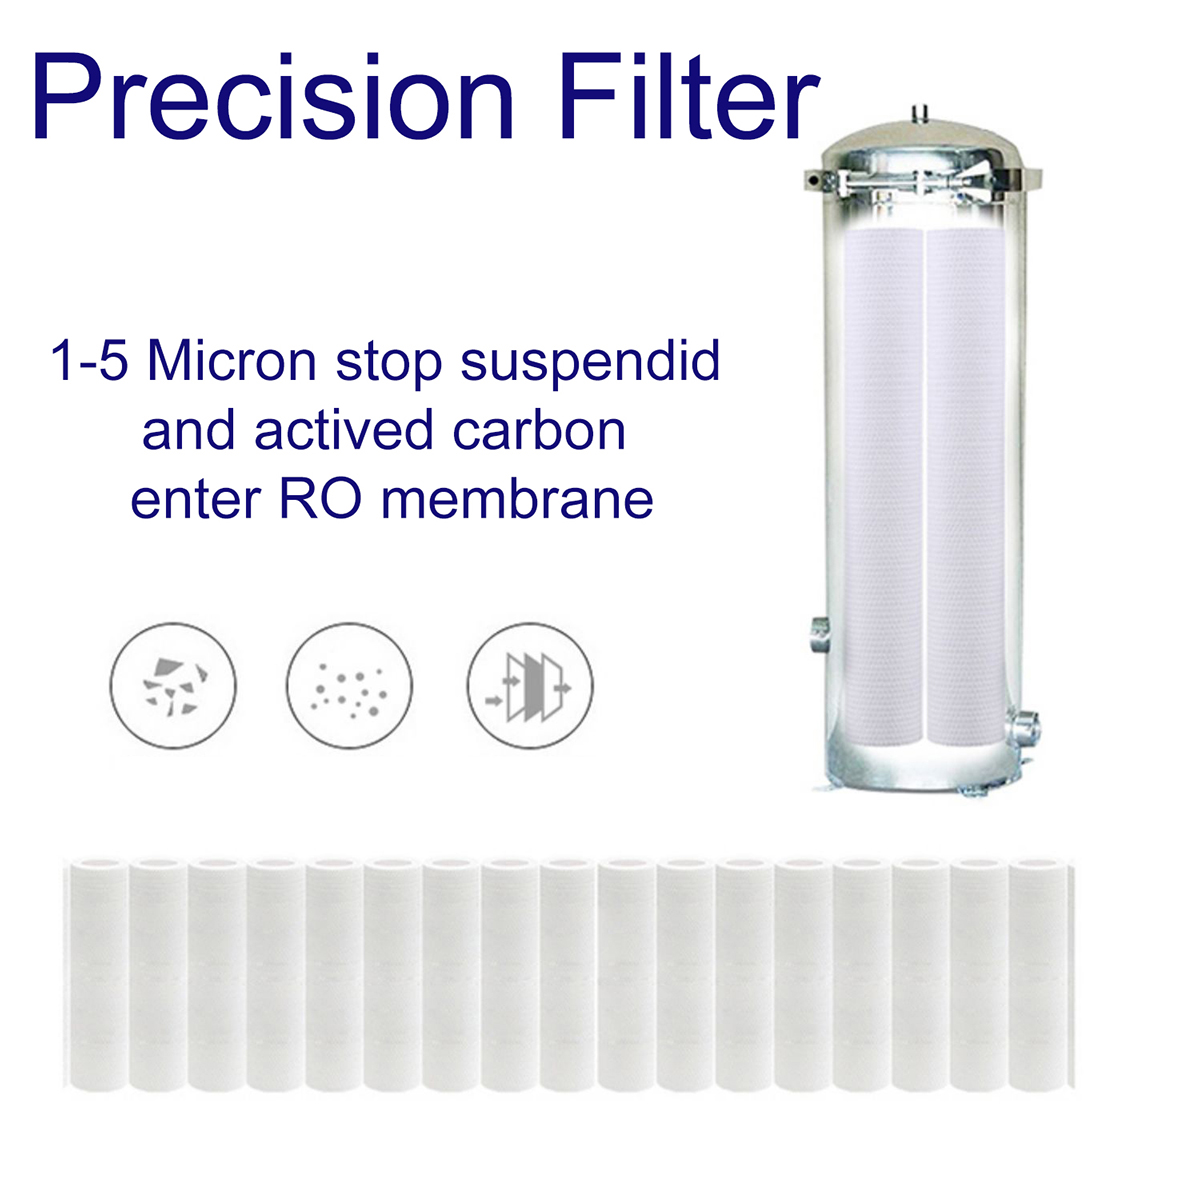 the precision filter for the ro water filter machine